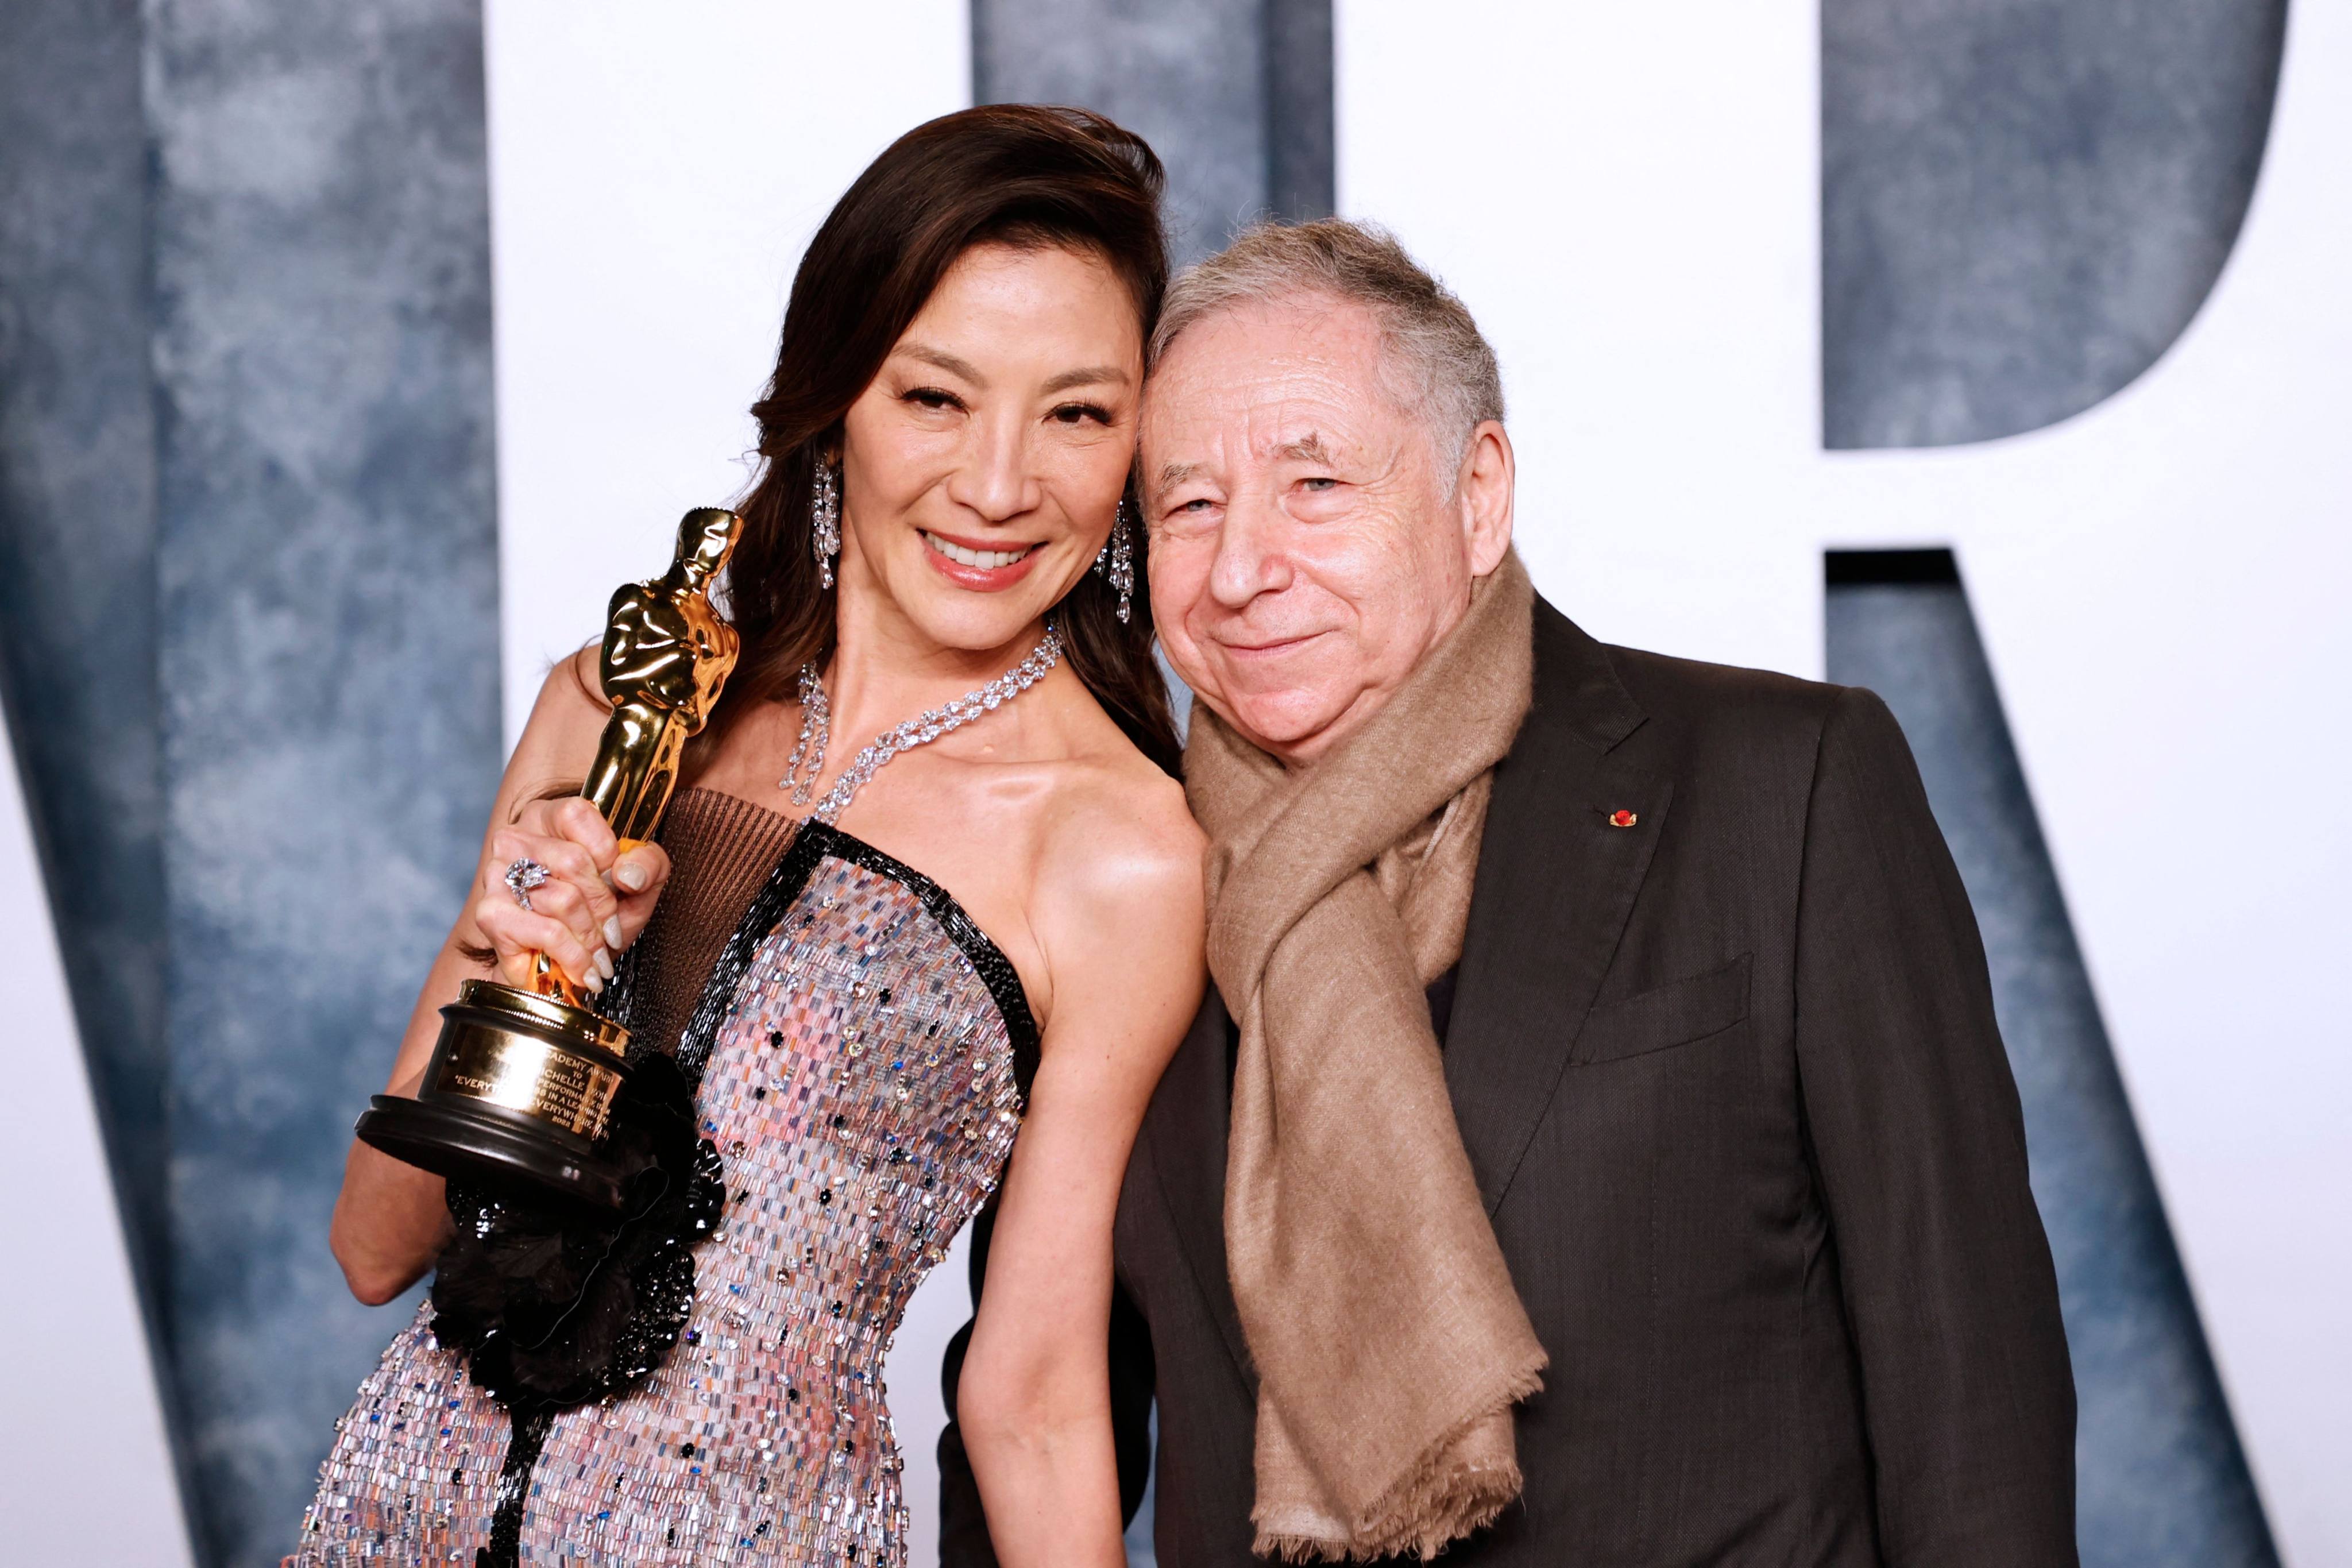 Malaysian actress Michelle Yeoh and French motor racing executive Jean Todt pose for photos after her win at the 95th Academy Awards after party. Photo: AFP